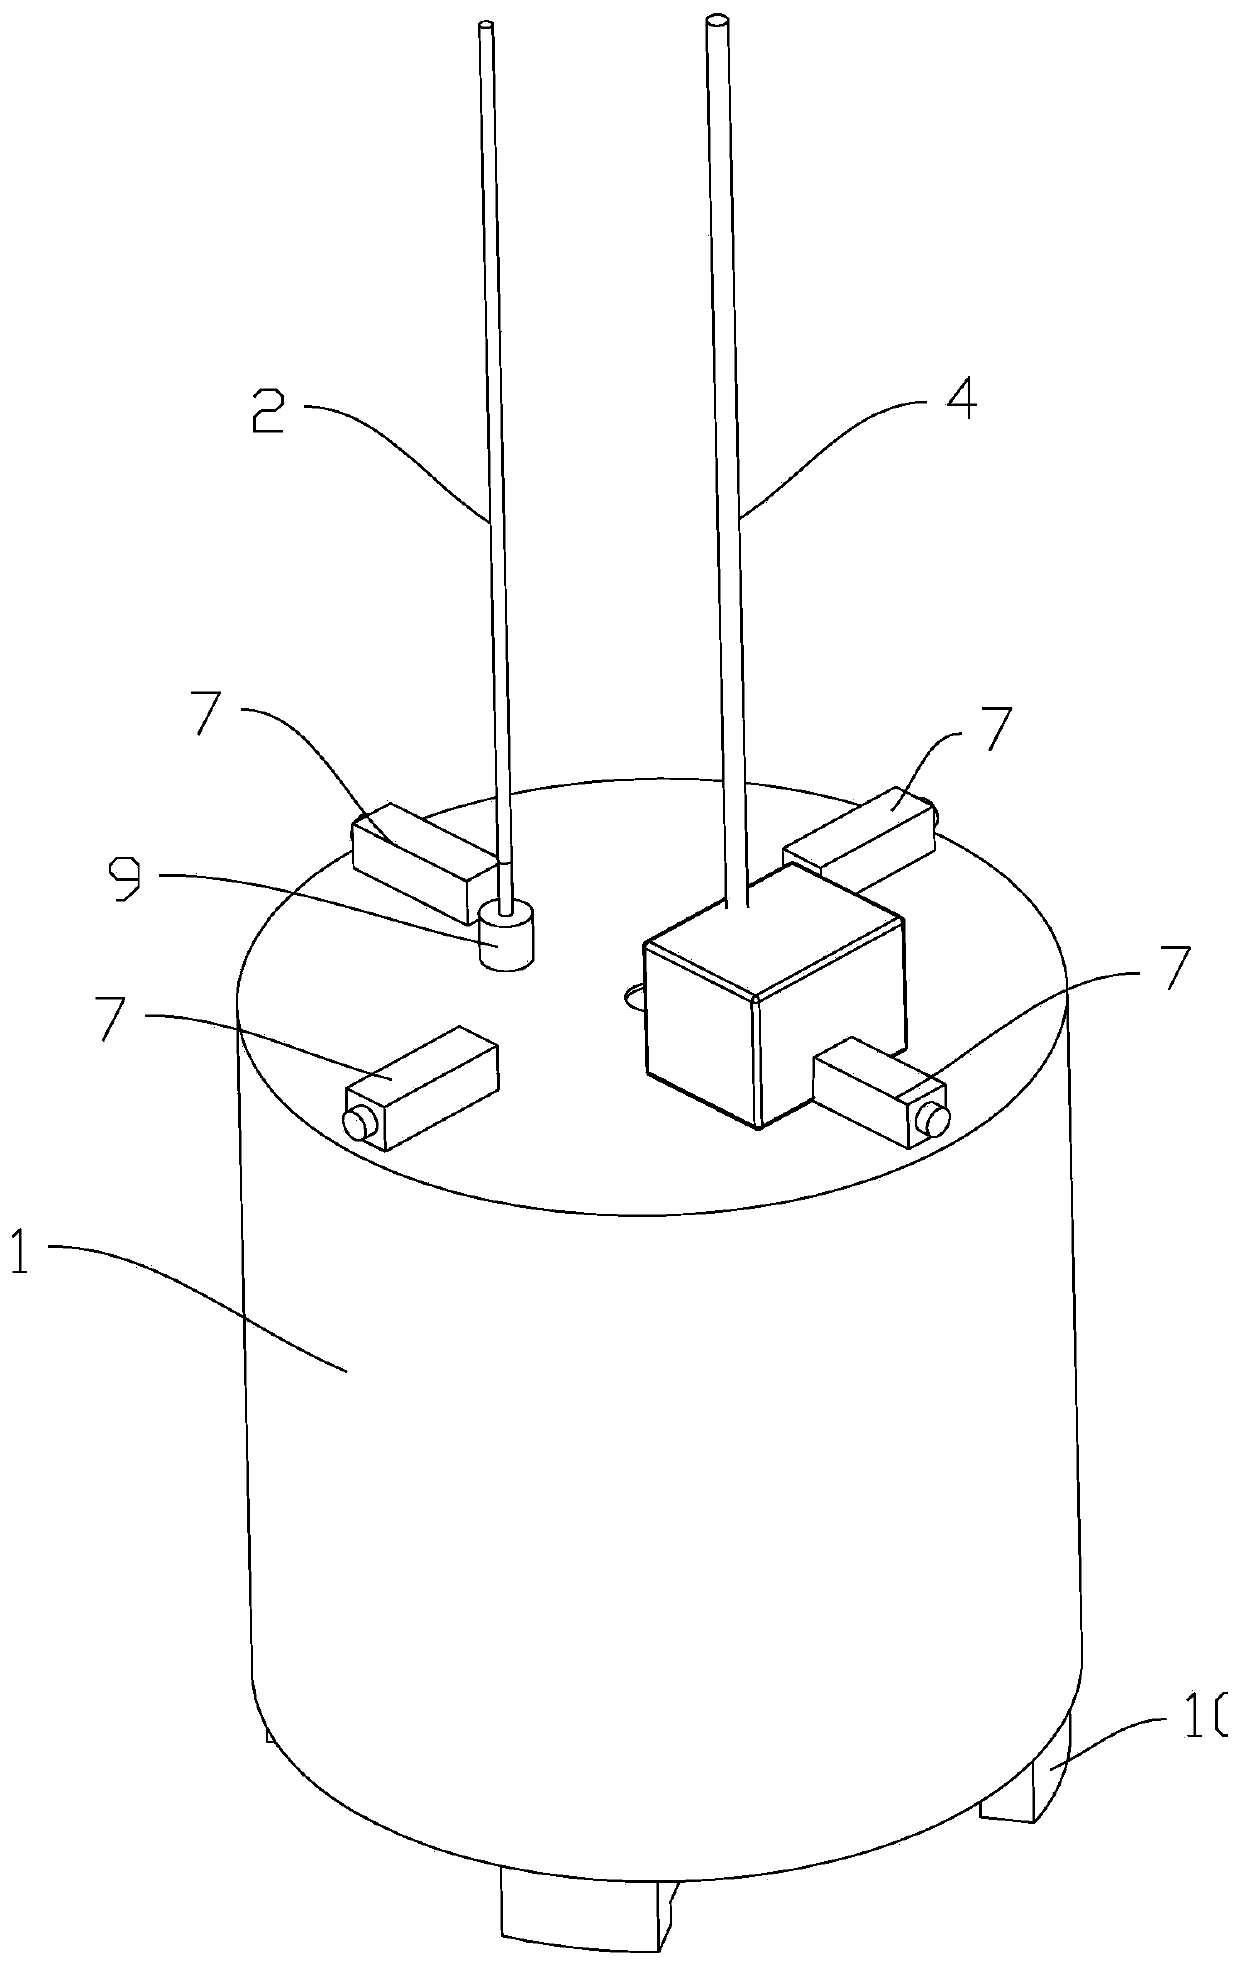 Drill bit fishing device and method